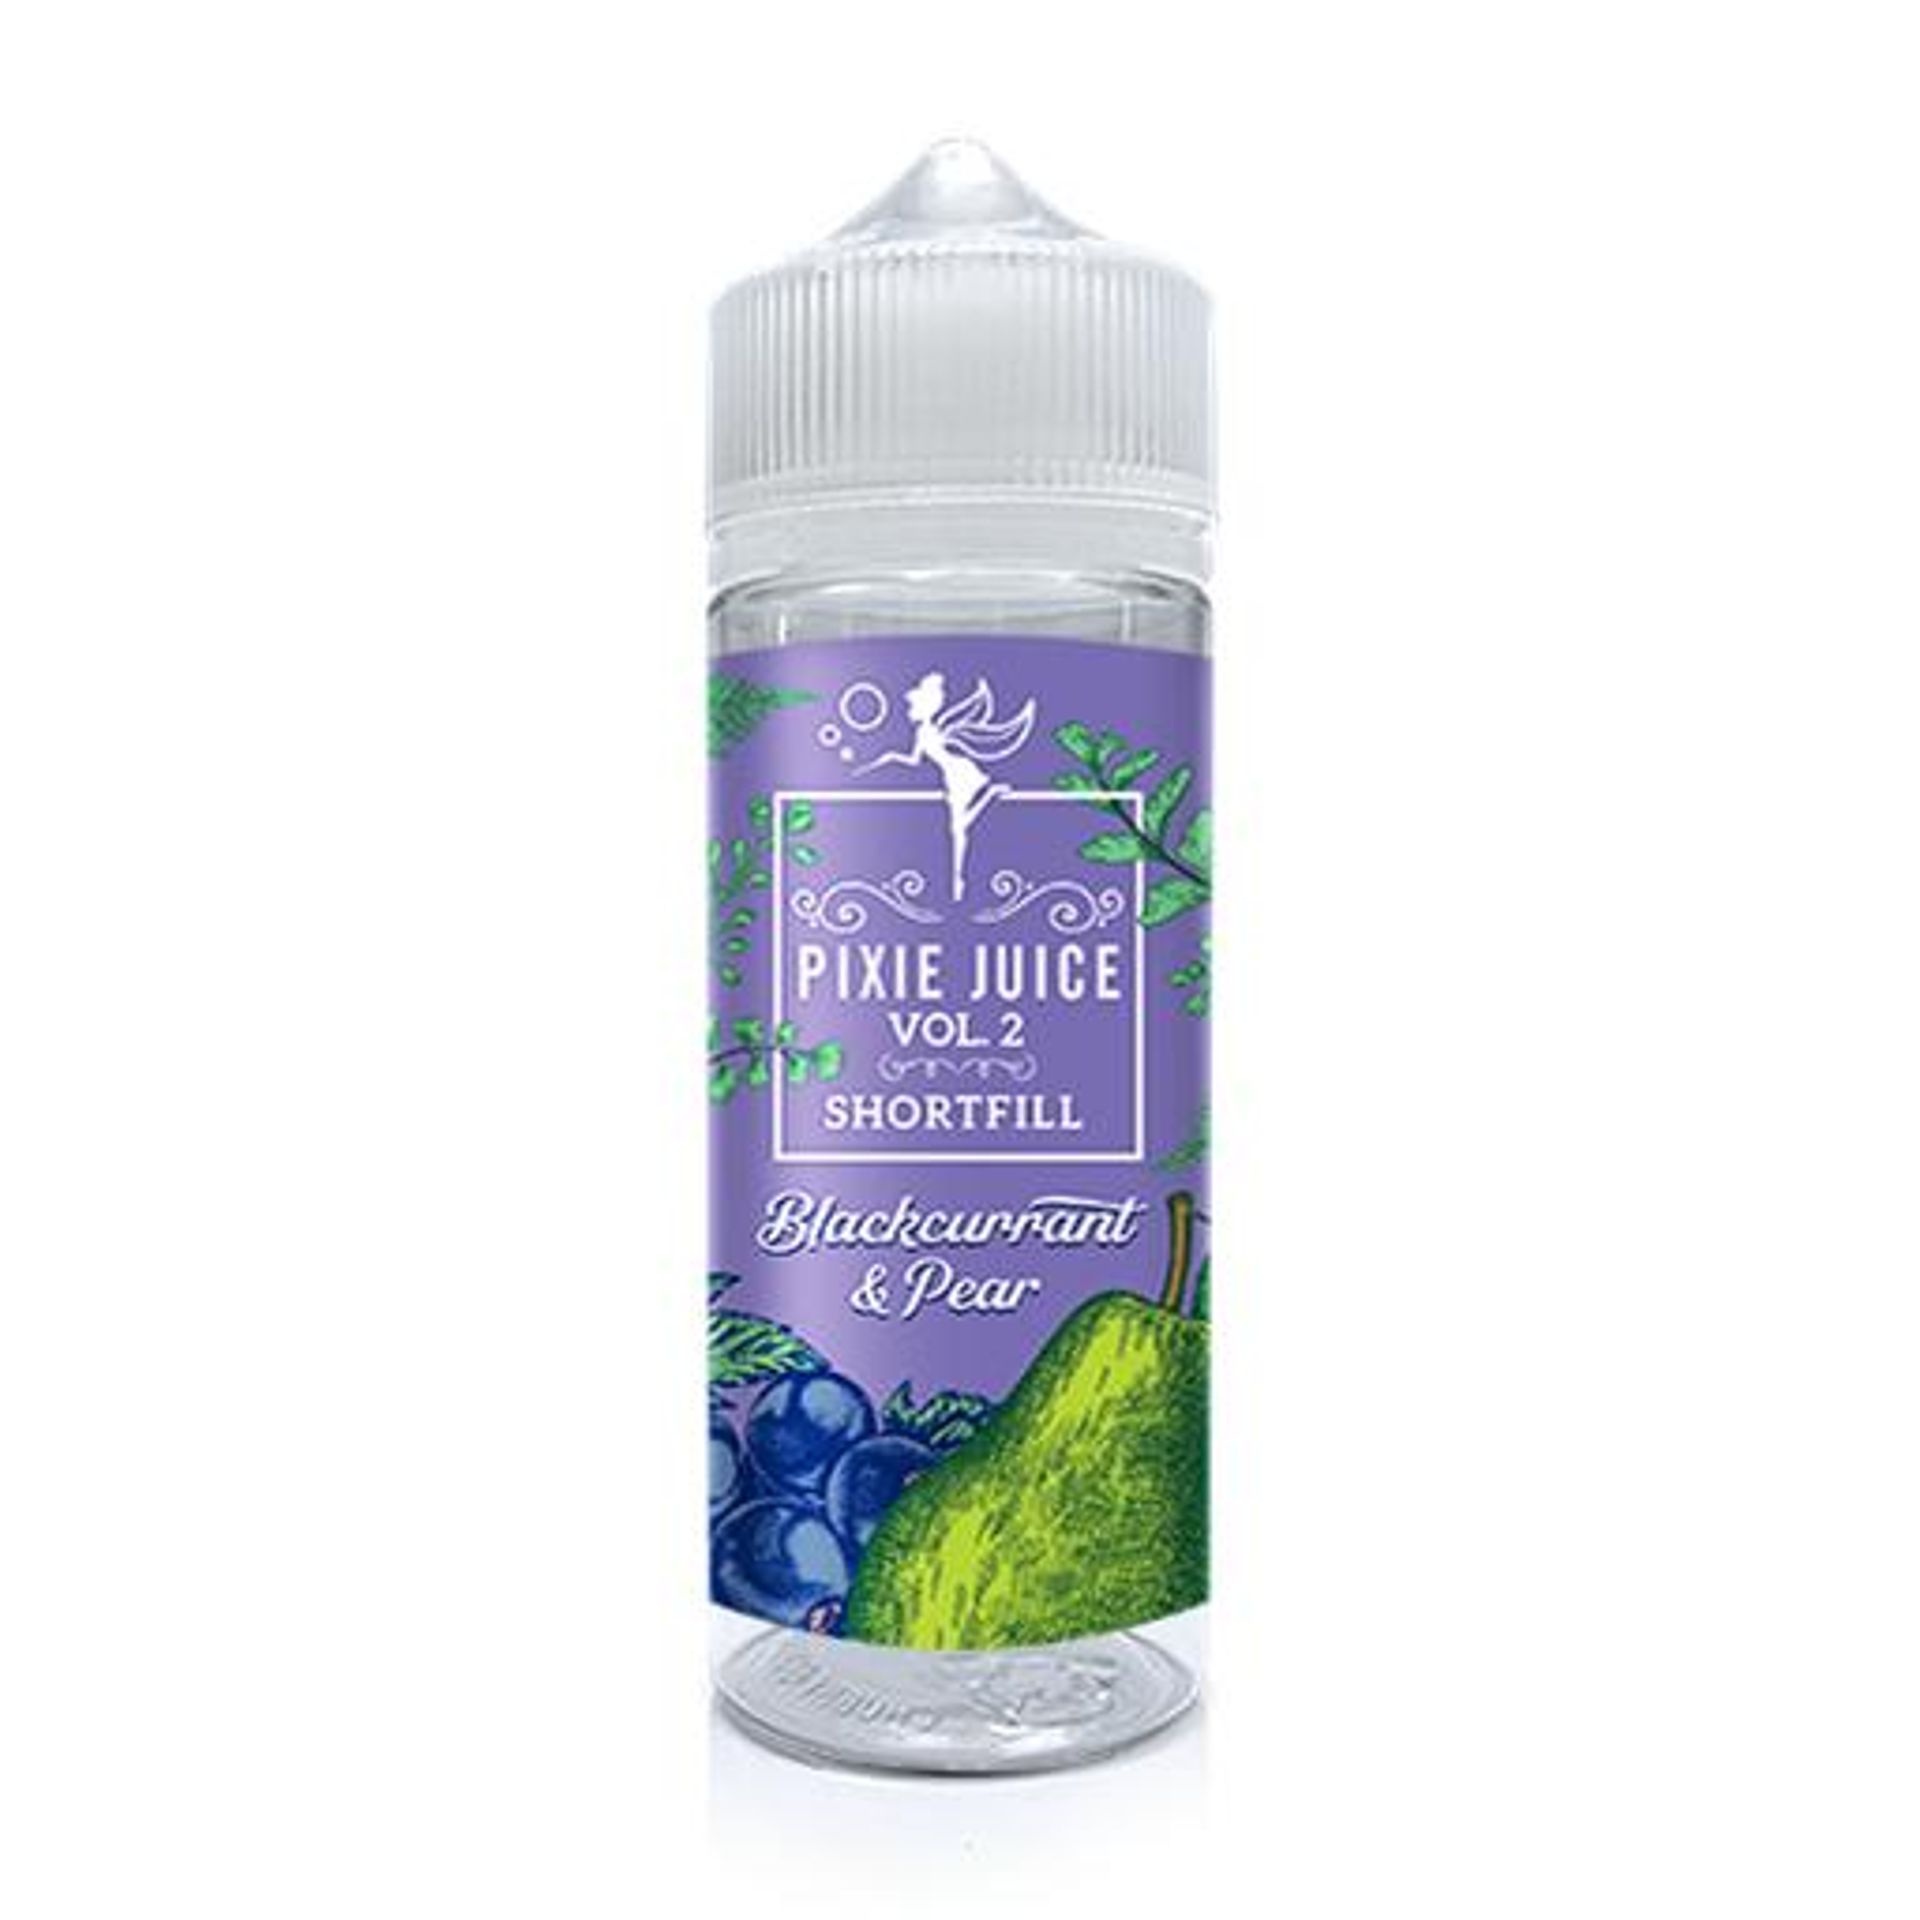 Image of Blackcurrant And Pear by Pixie Juice Vol2